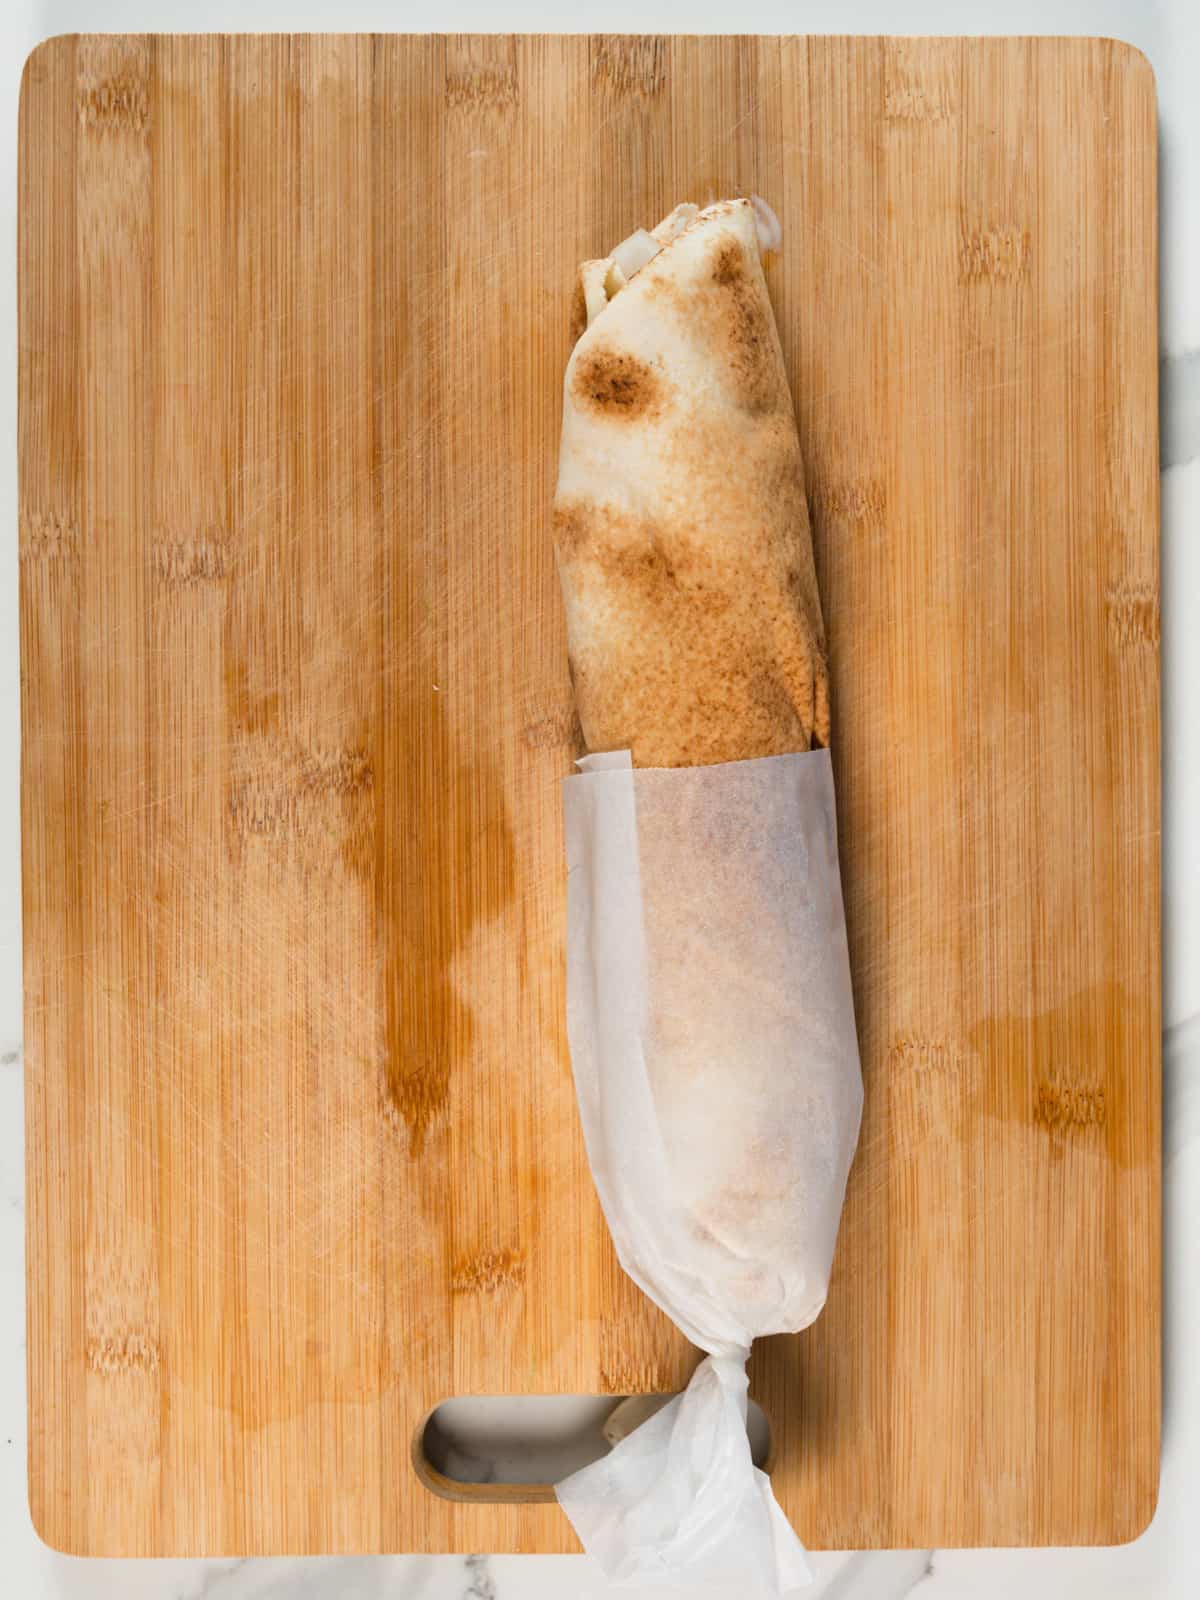 a pita roll with paper wrapped around half of it